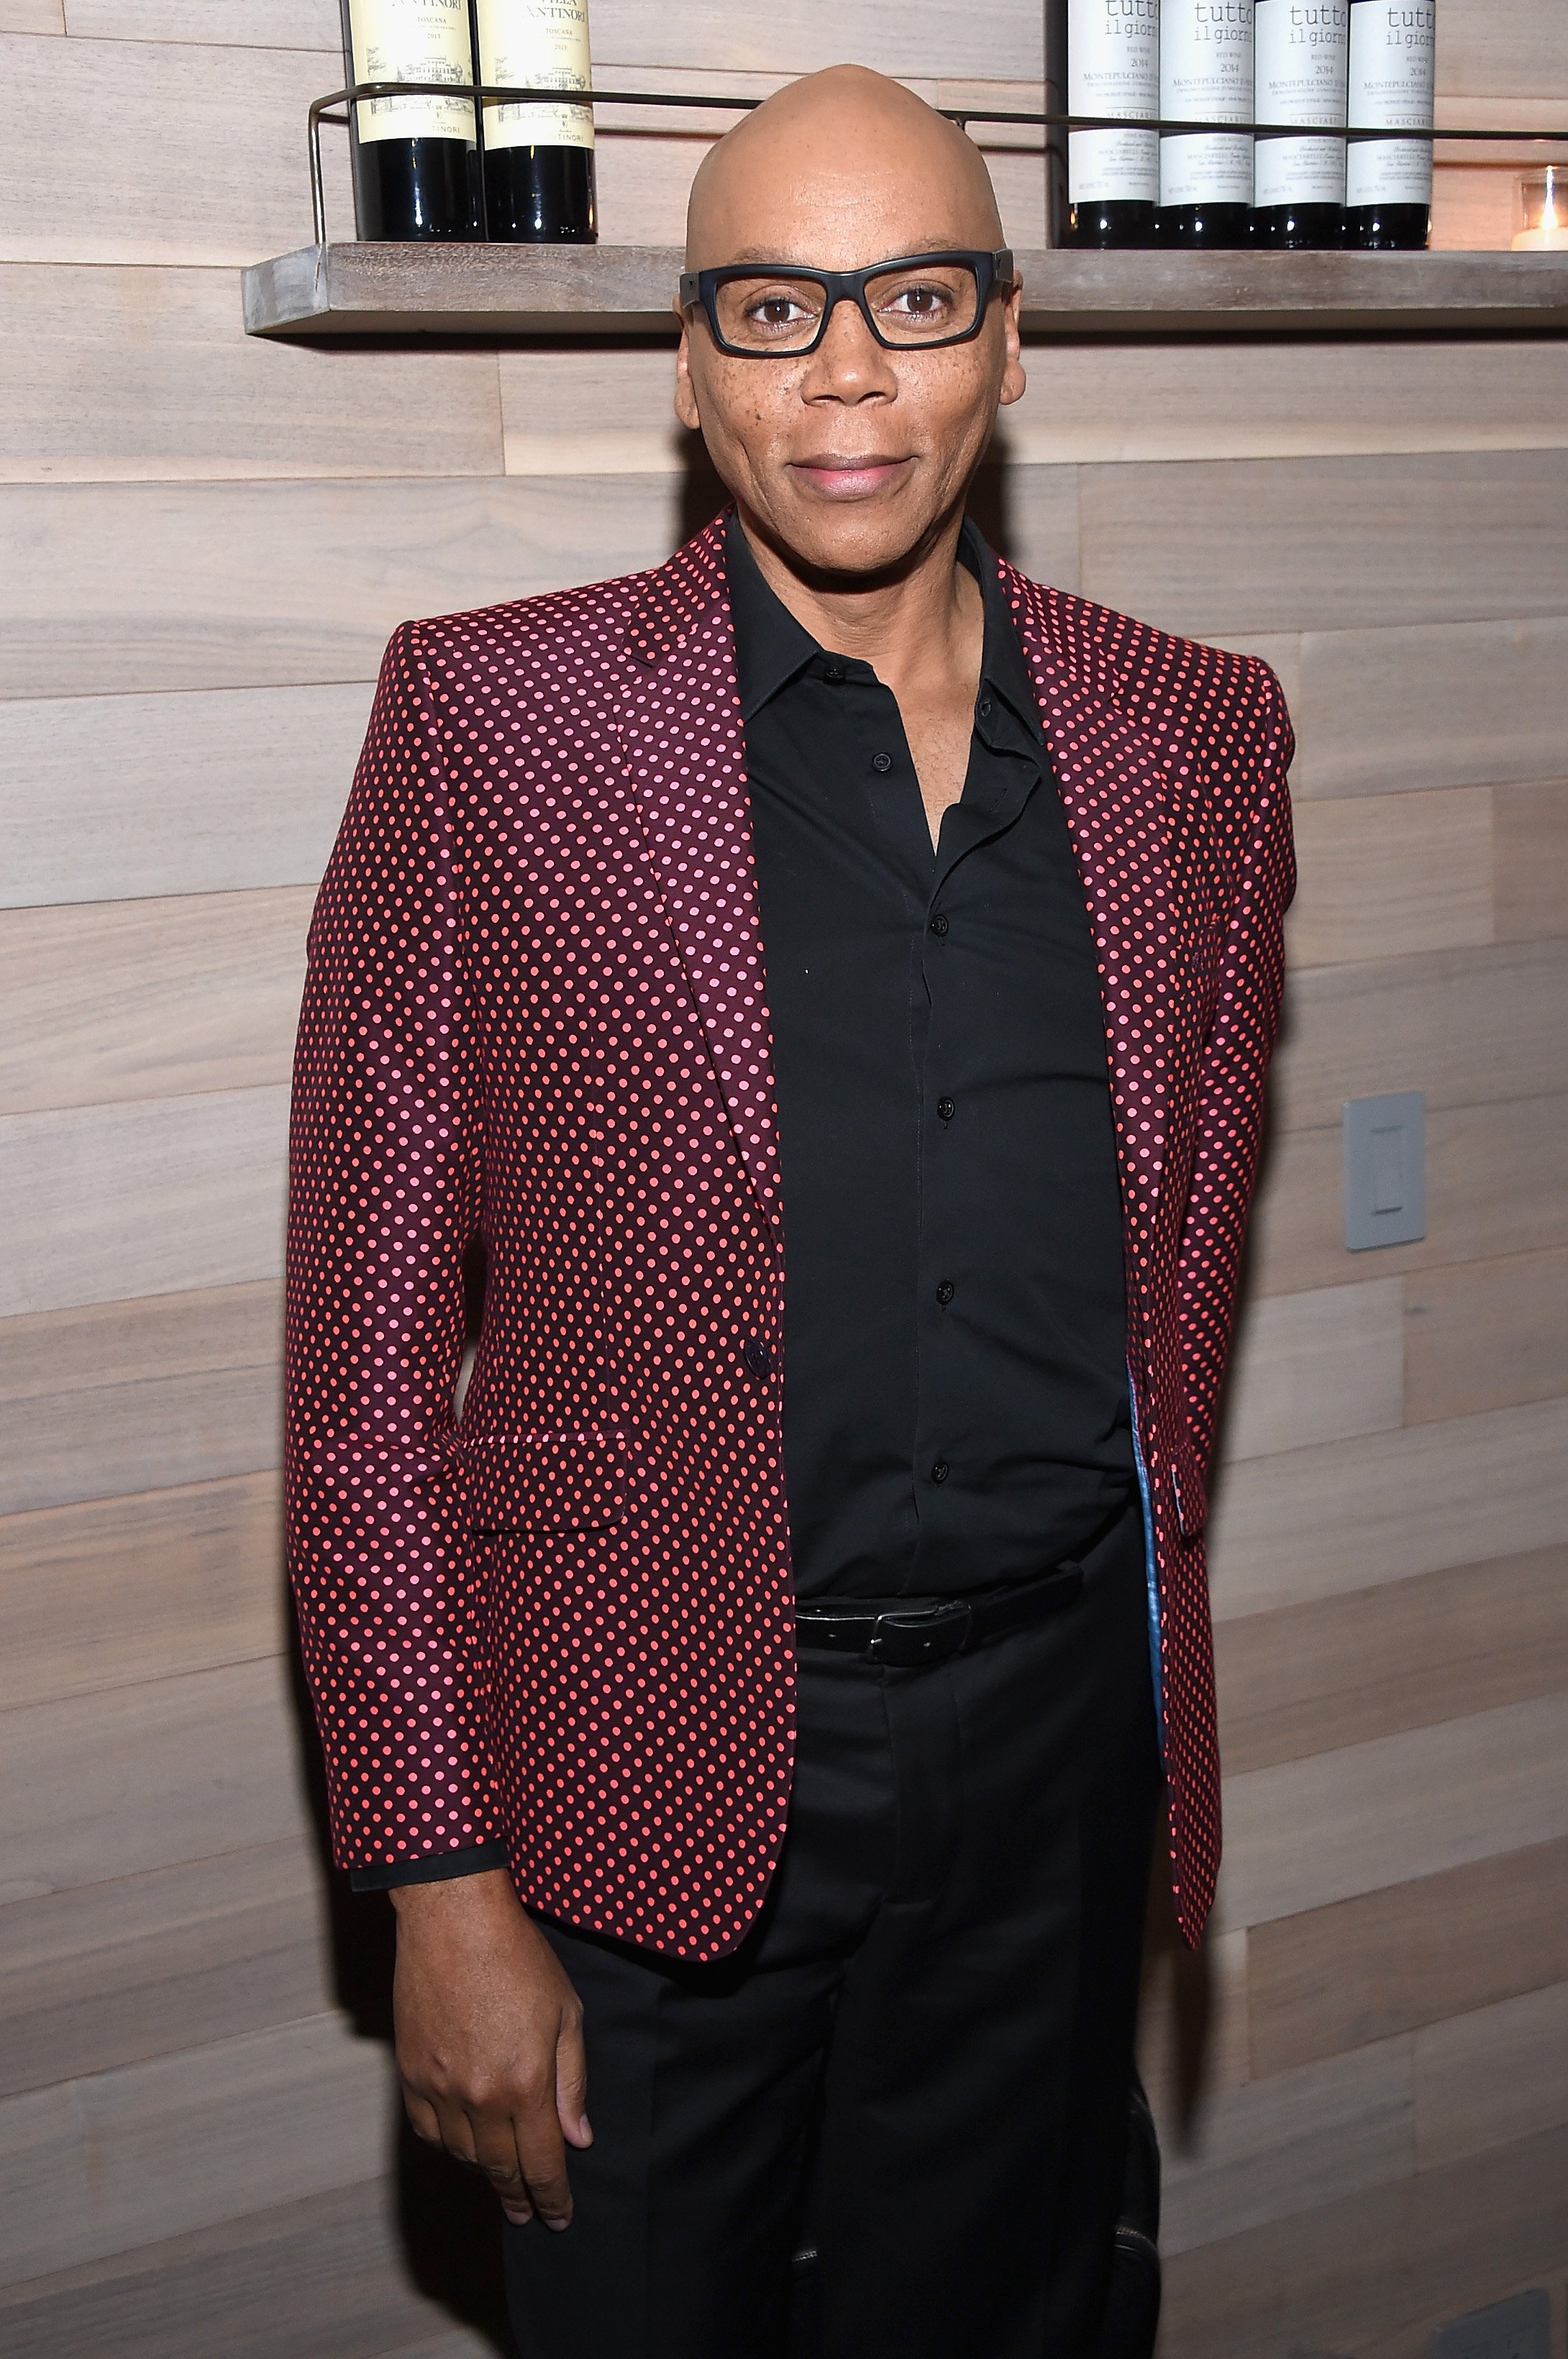 RuPaul attends The Season 2 Premiere Of "Shades Of Blue" after party at Tutto Il Giorno on March 1, 2017. | Photo: Getty Images